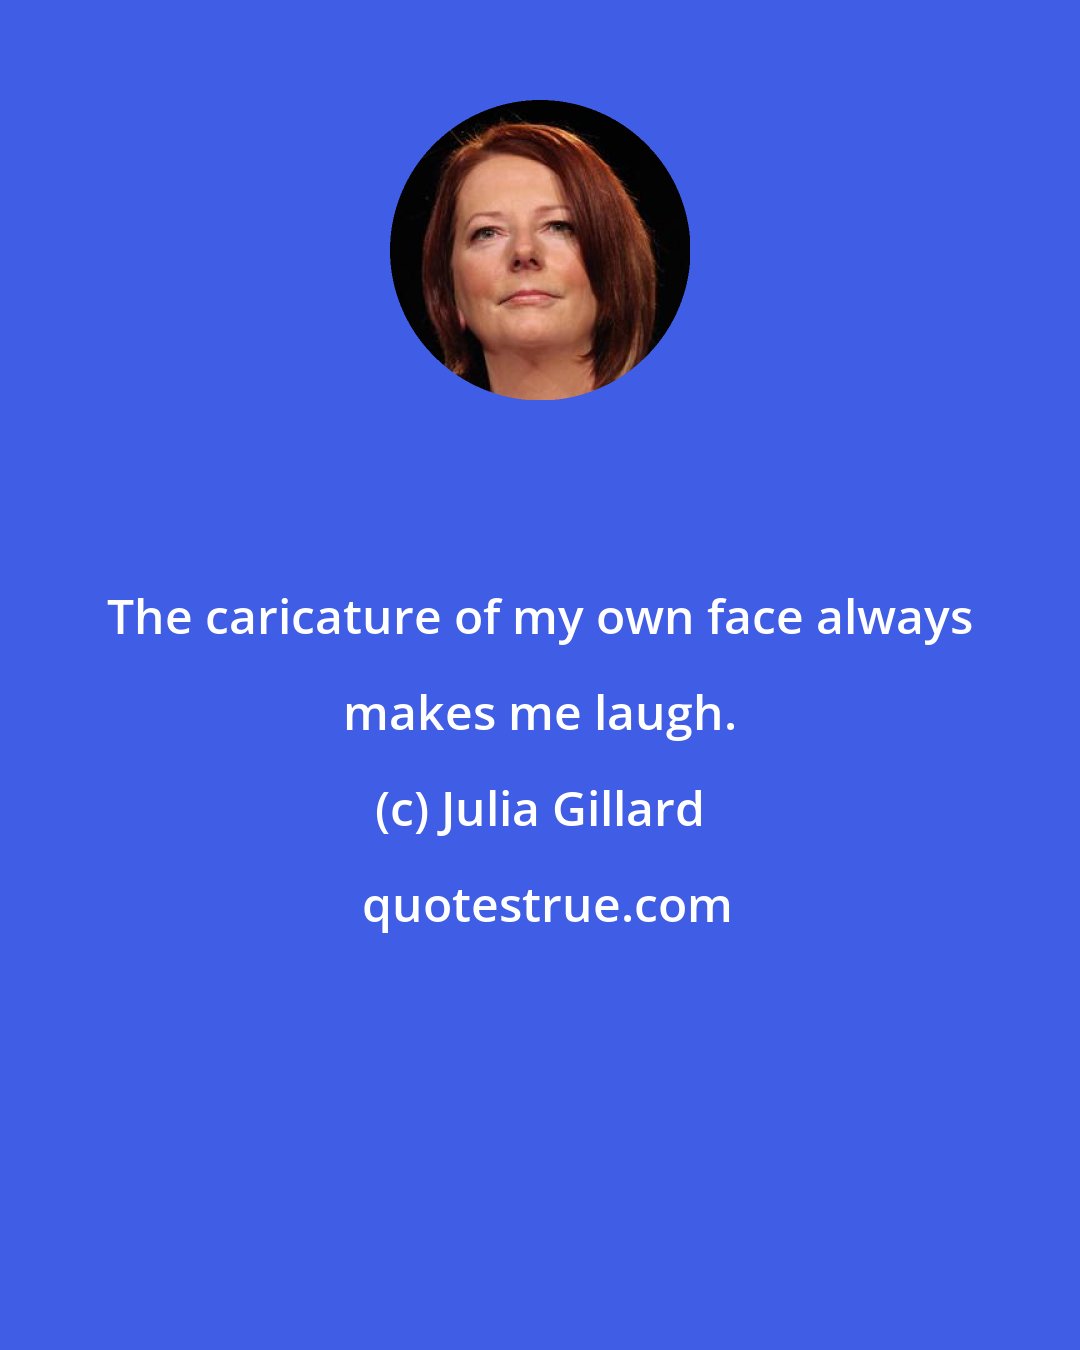 Julia Gillard: The caricature of my own face always makes me laugh.